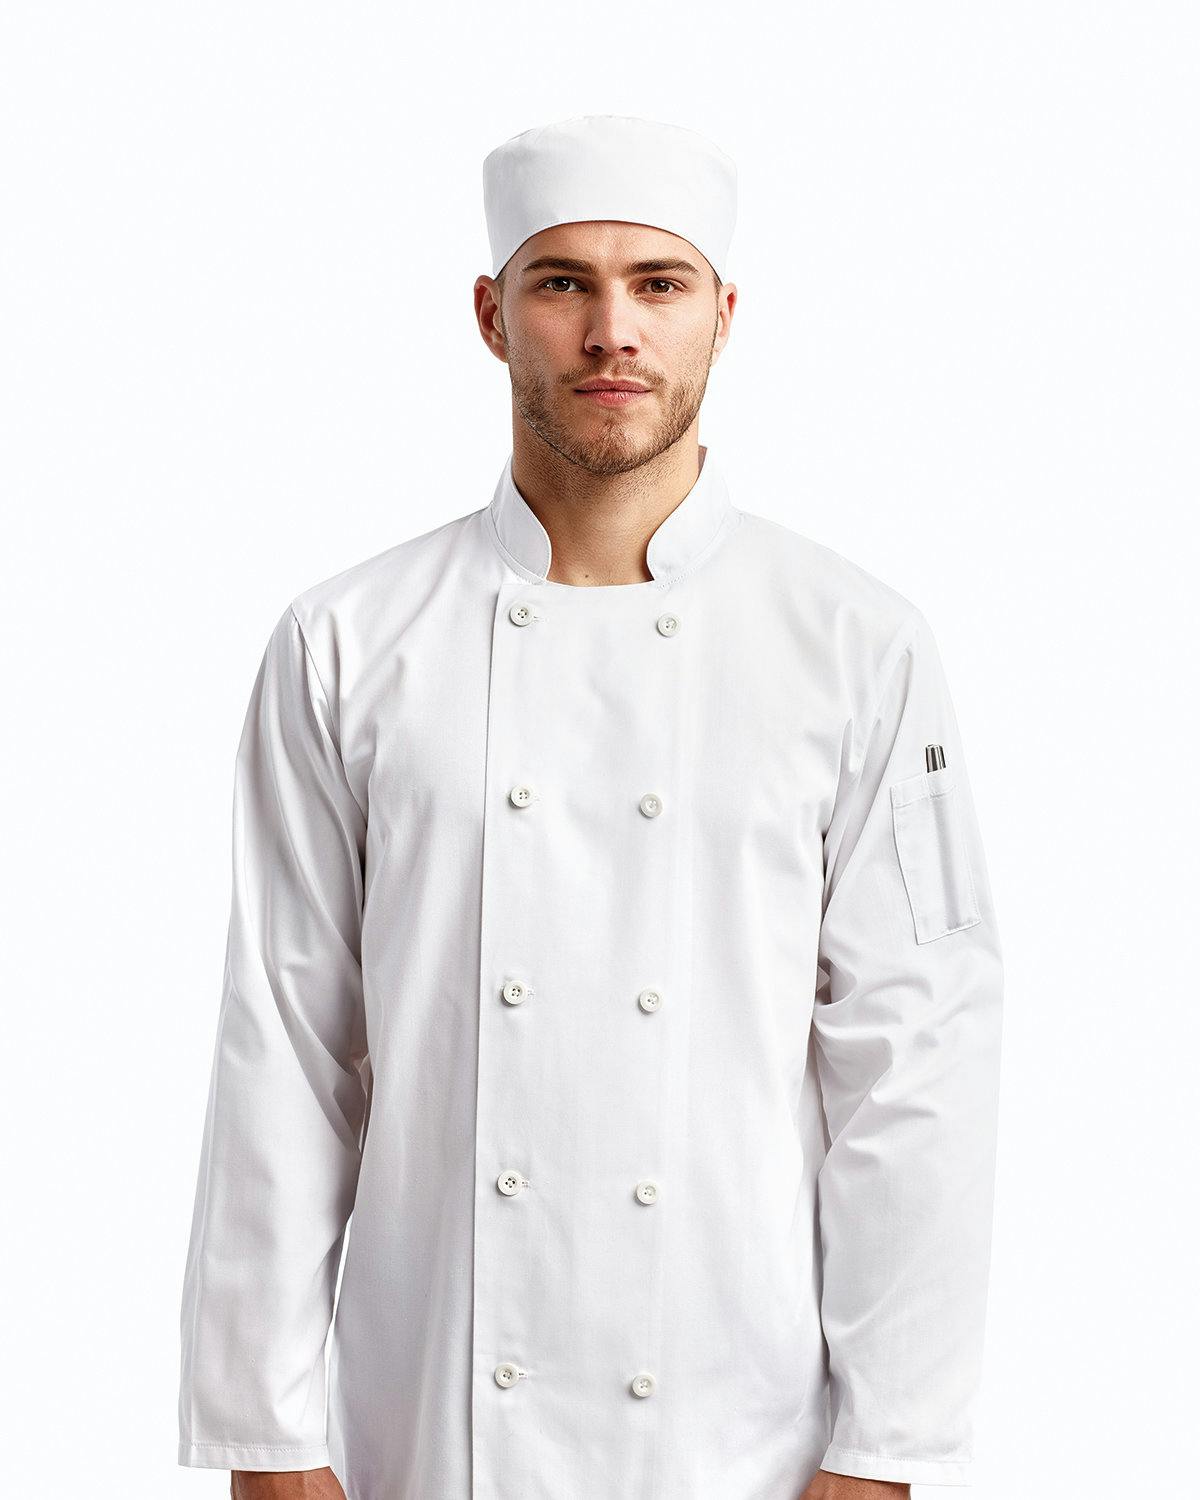 Image for Unisex Chef's Beanie